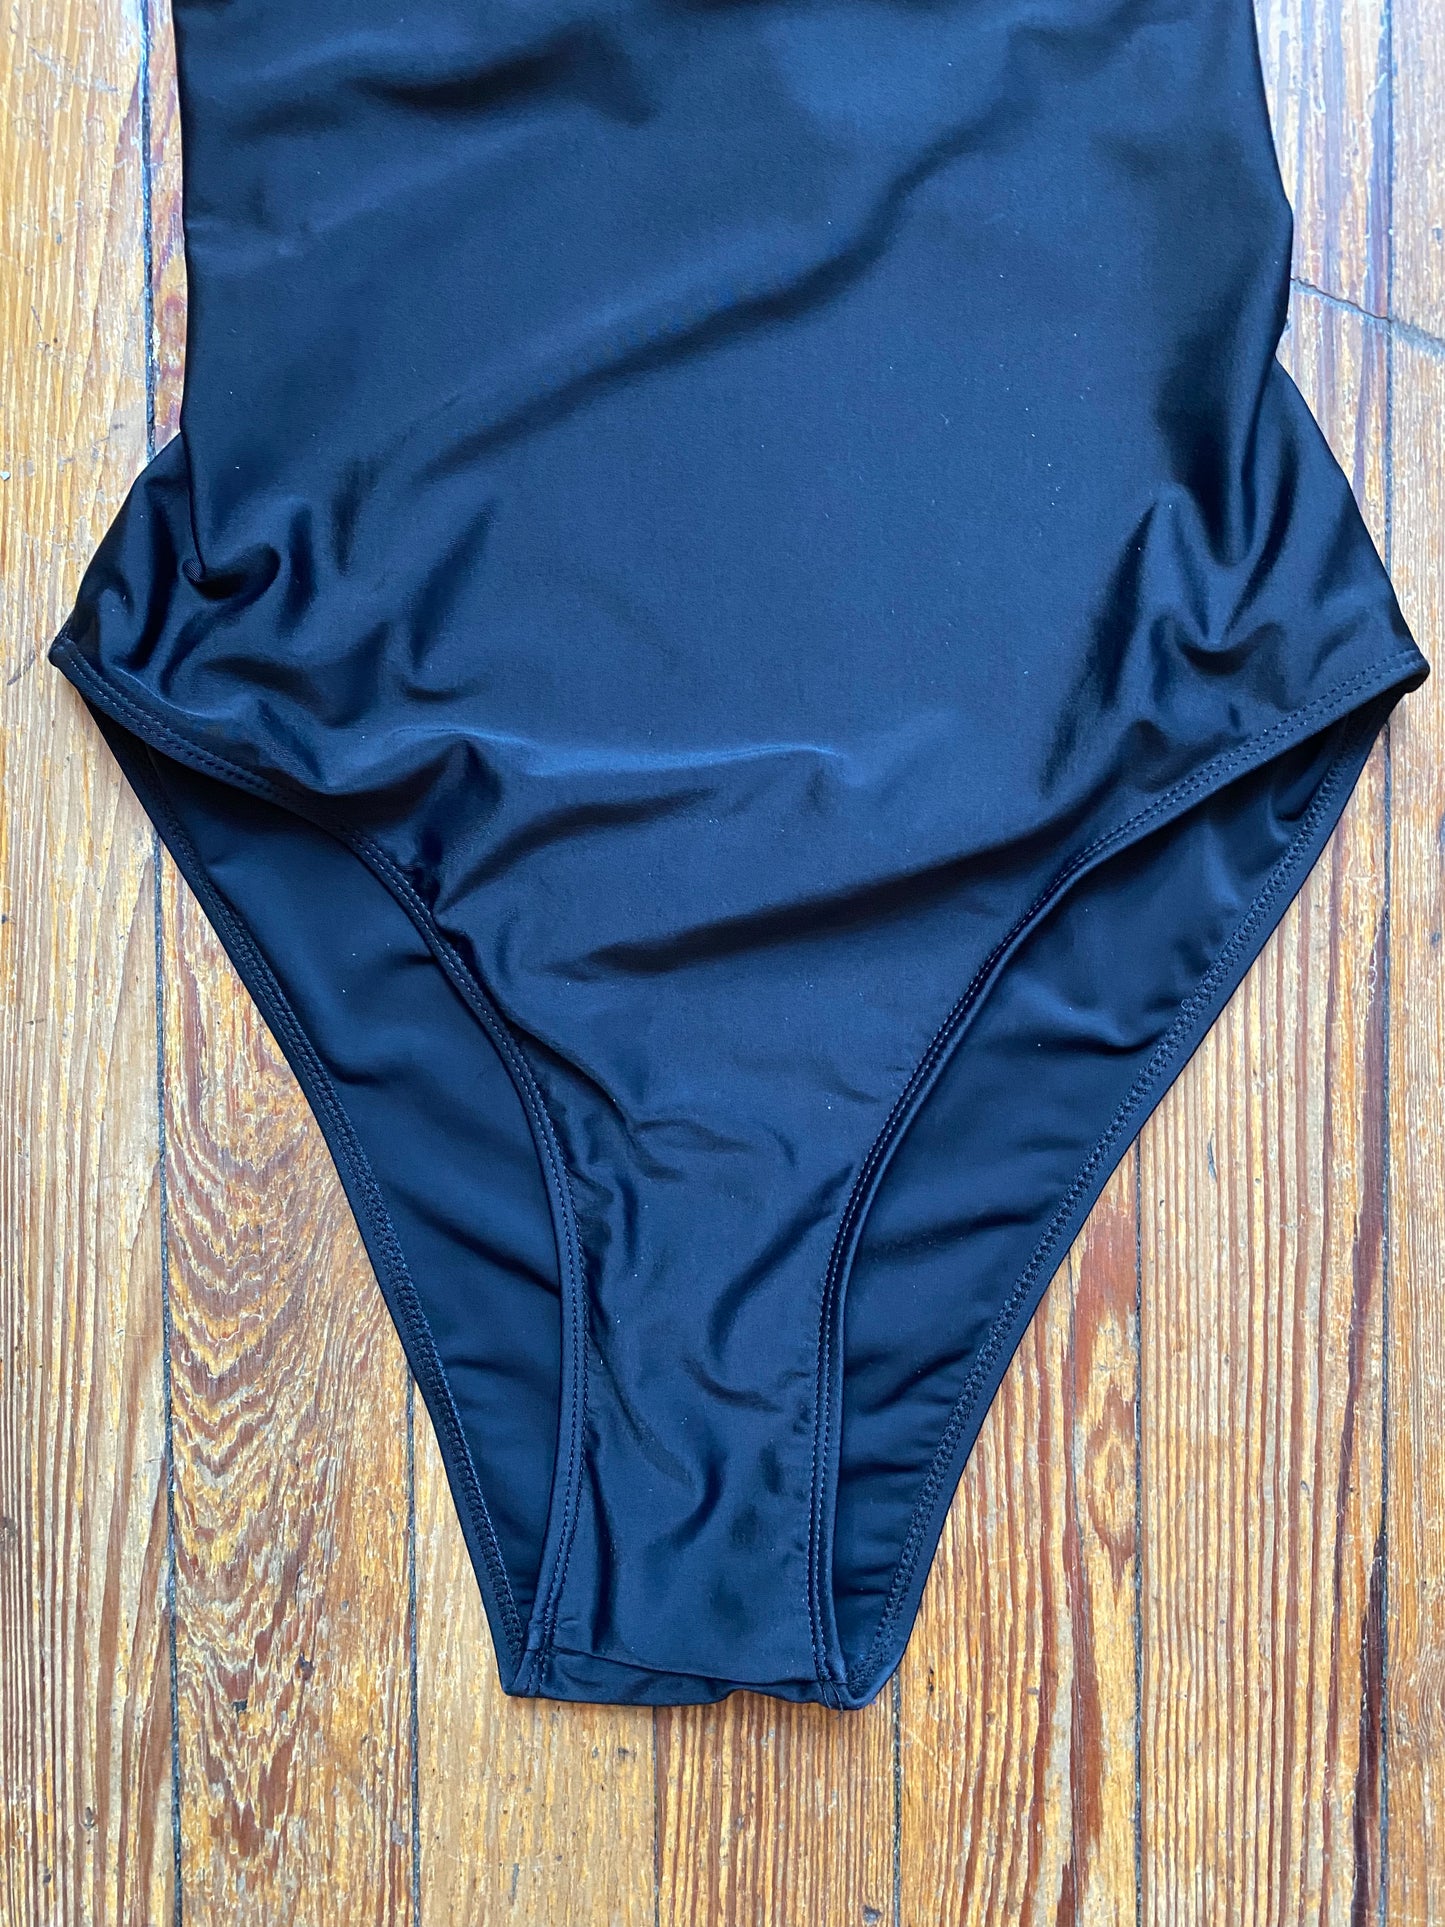 Black 80’s Style High Cut One Piece